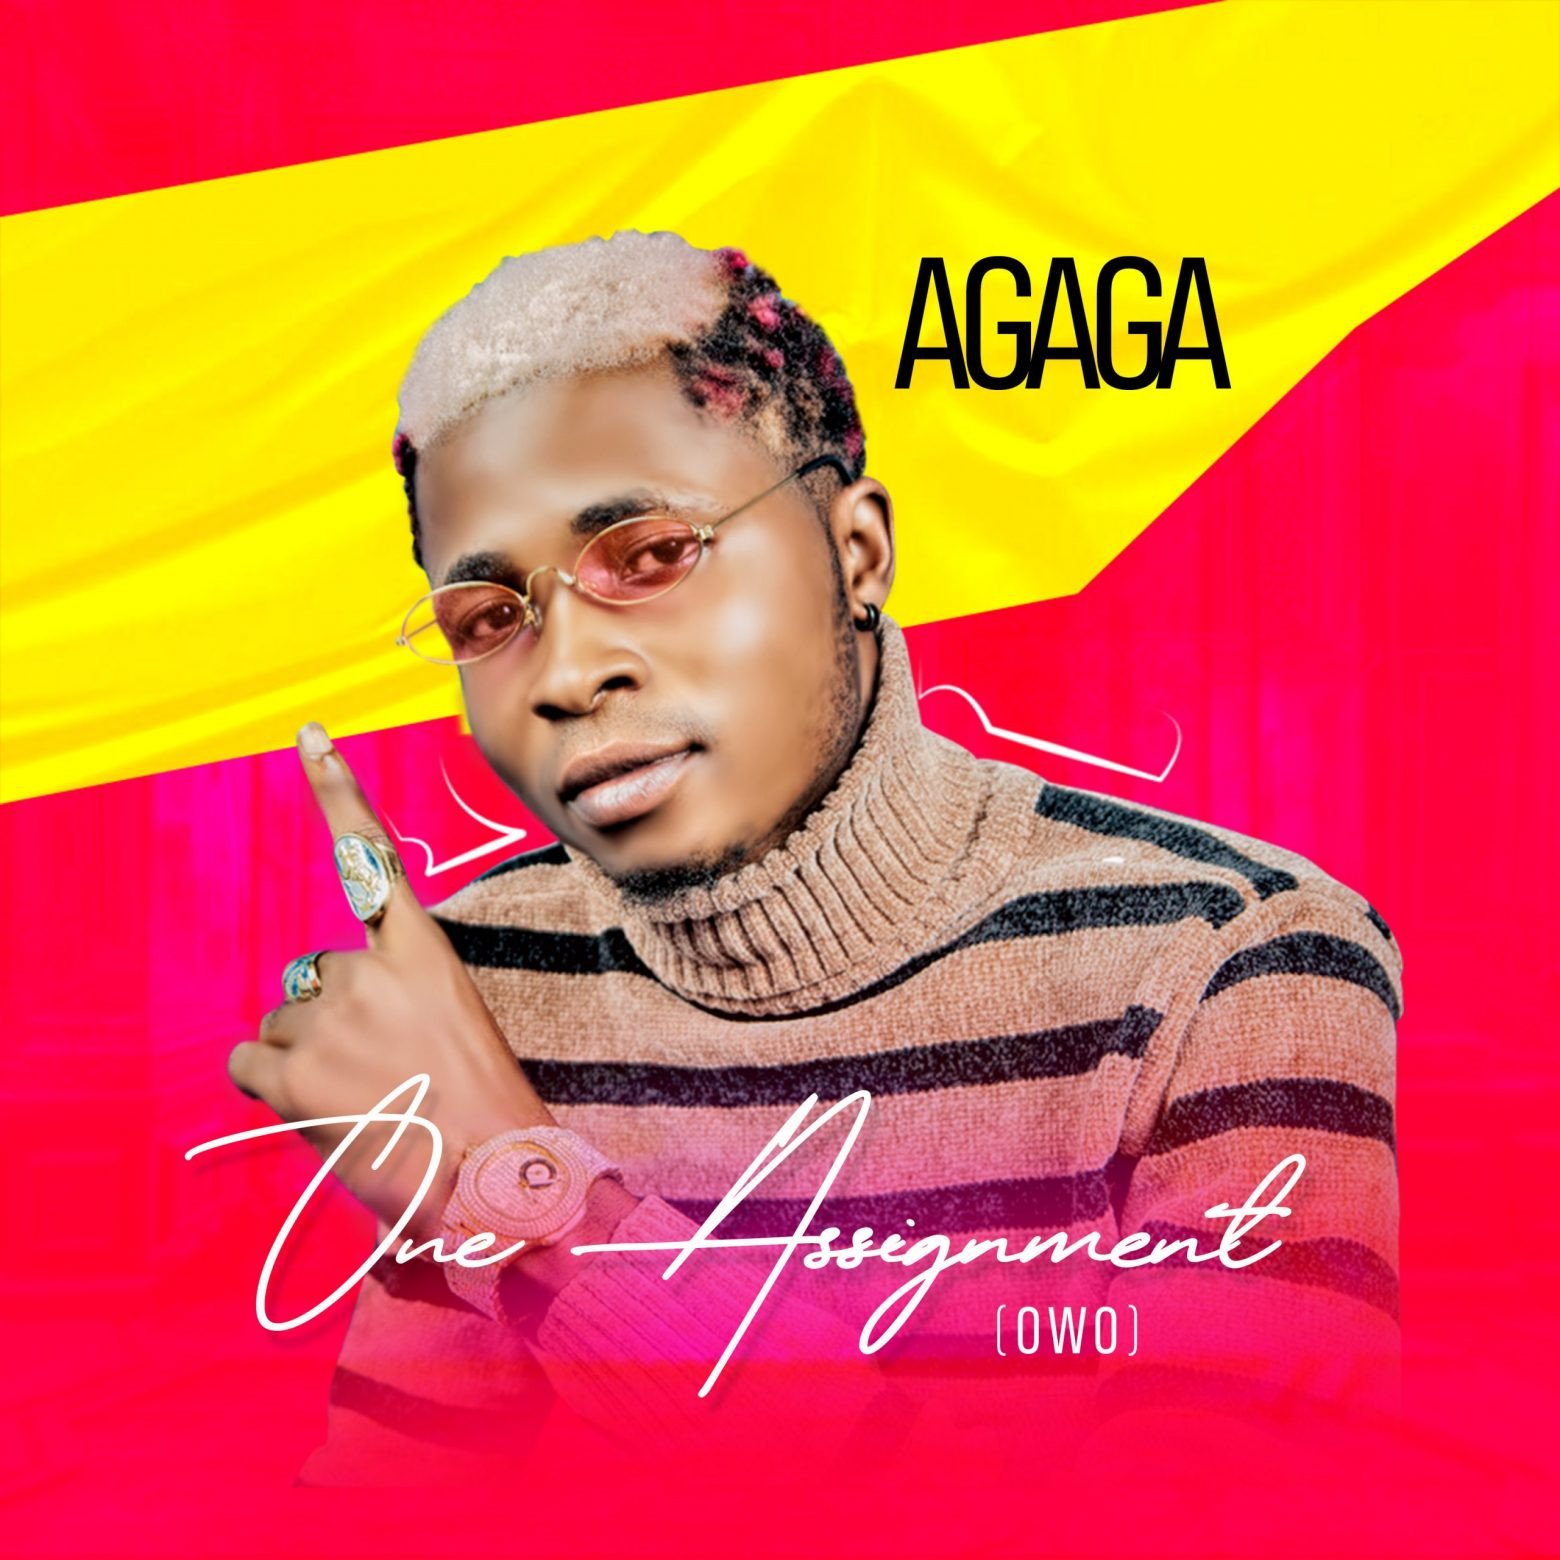 agaga one assignment remix